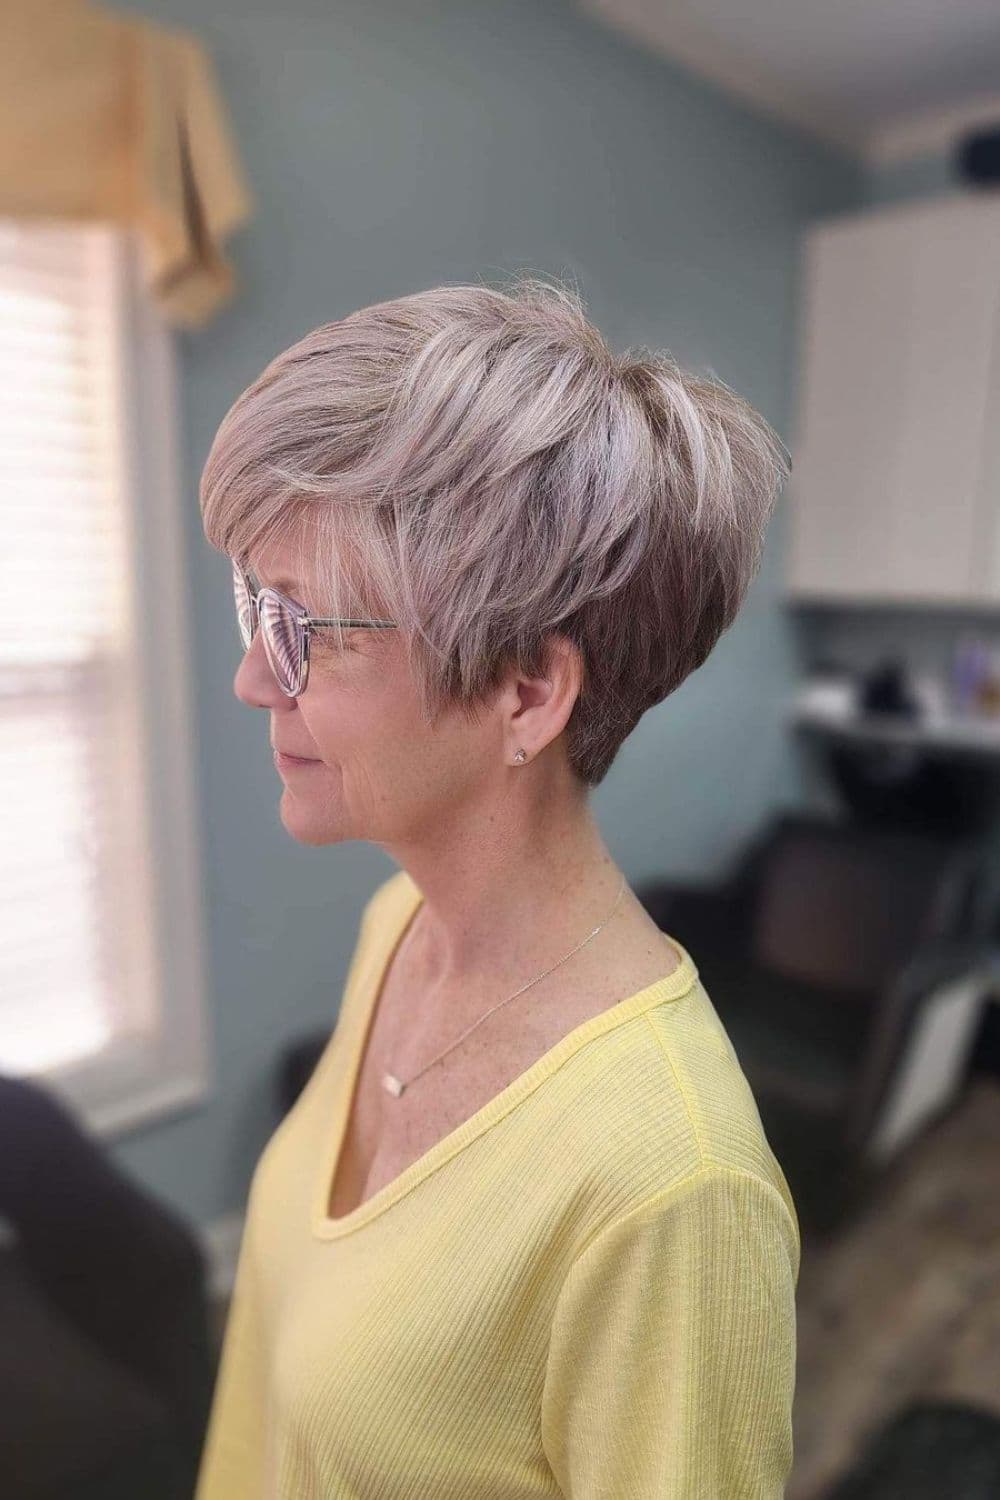 A woman with a gray layered pixie cut.